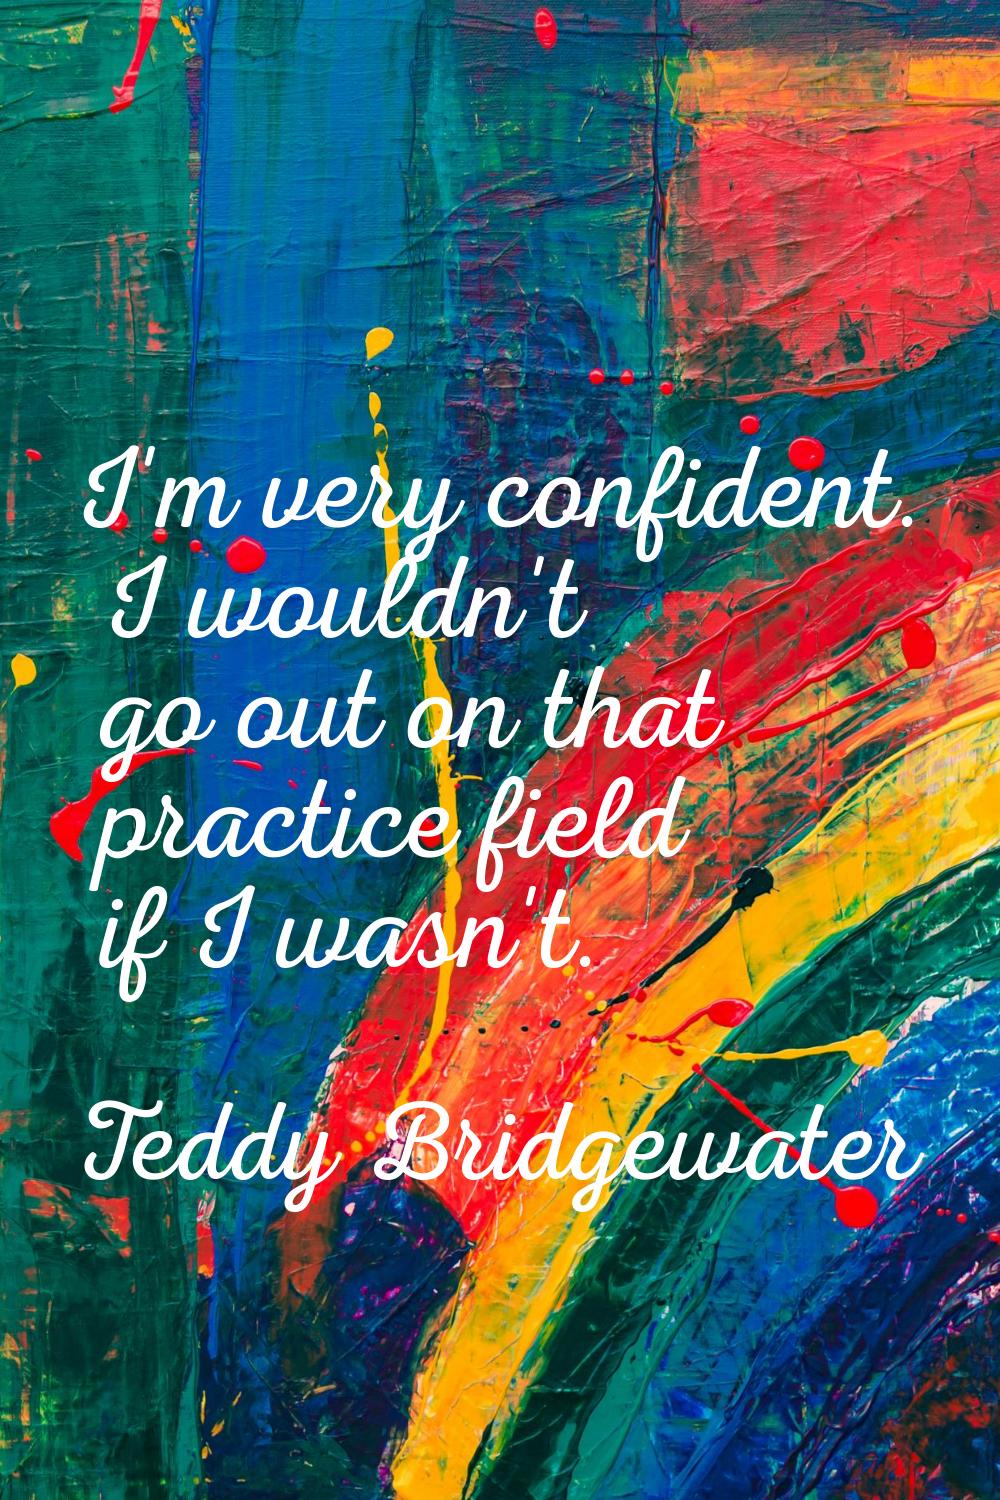 I'm very confident. I wouldn't go out on that practice field if I wasn't.